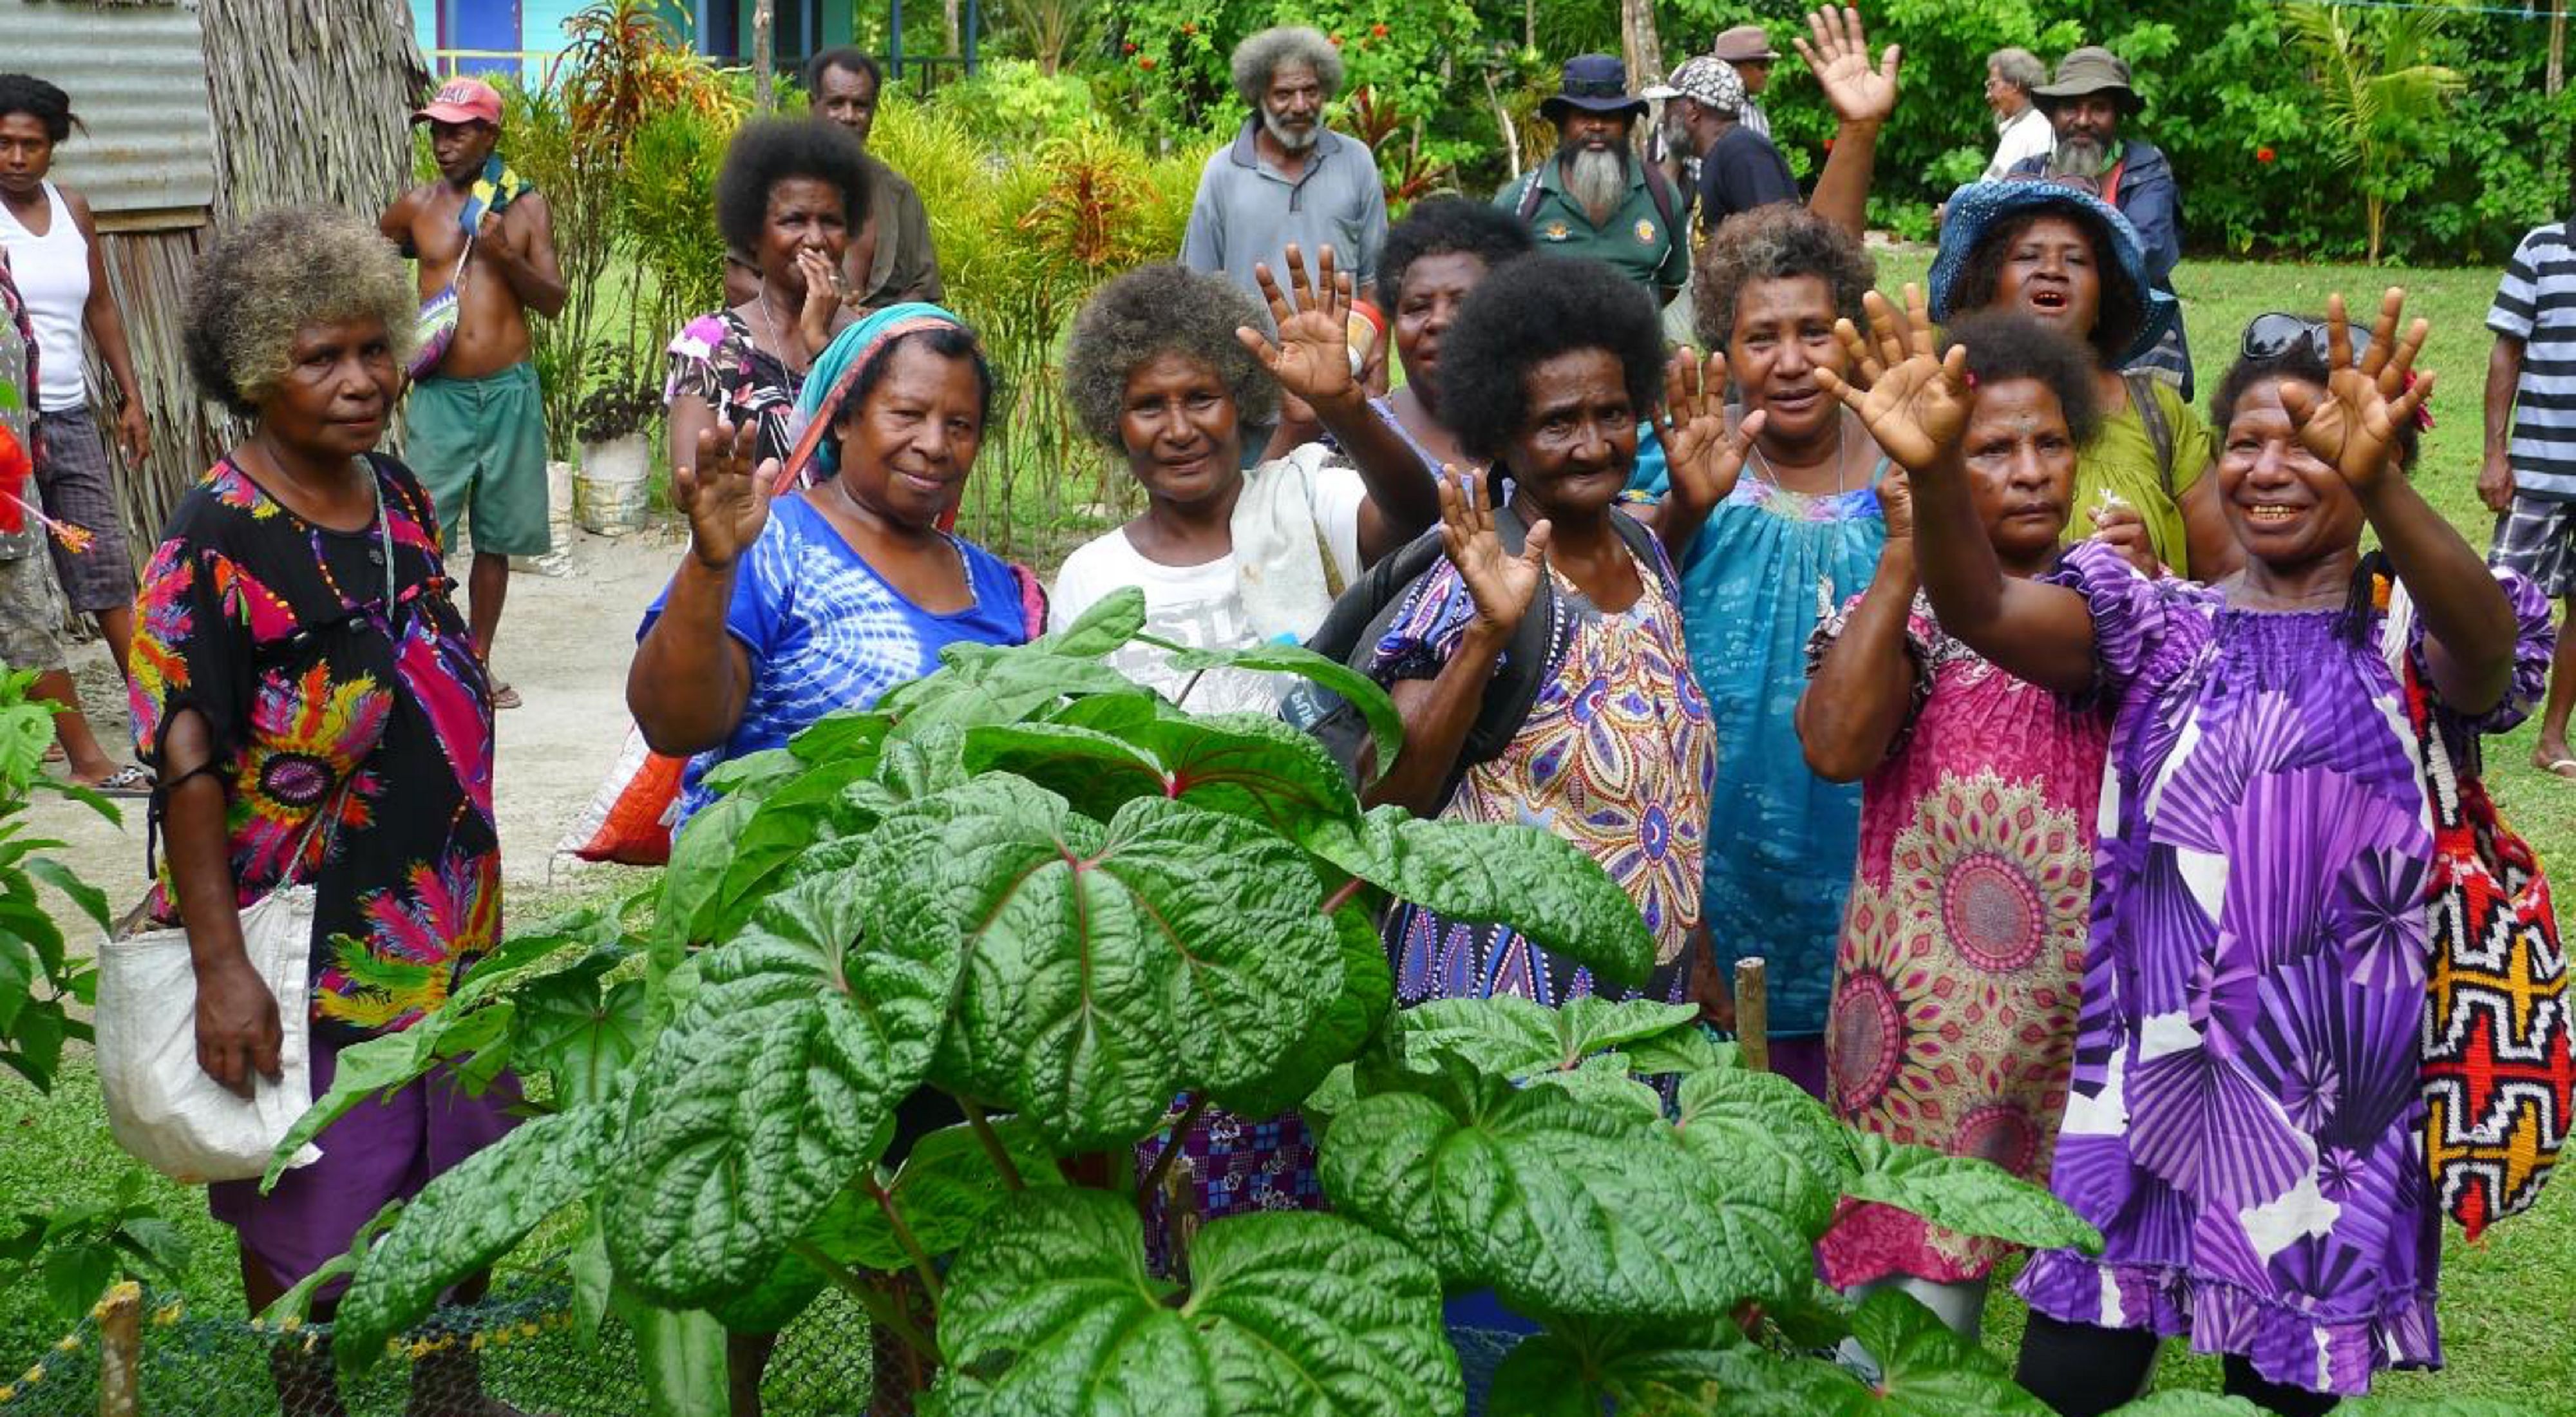 women from Papua New Guinea are exploring new sustainable business opportunities.